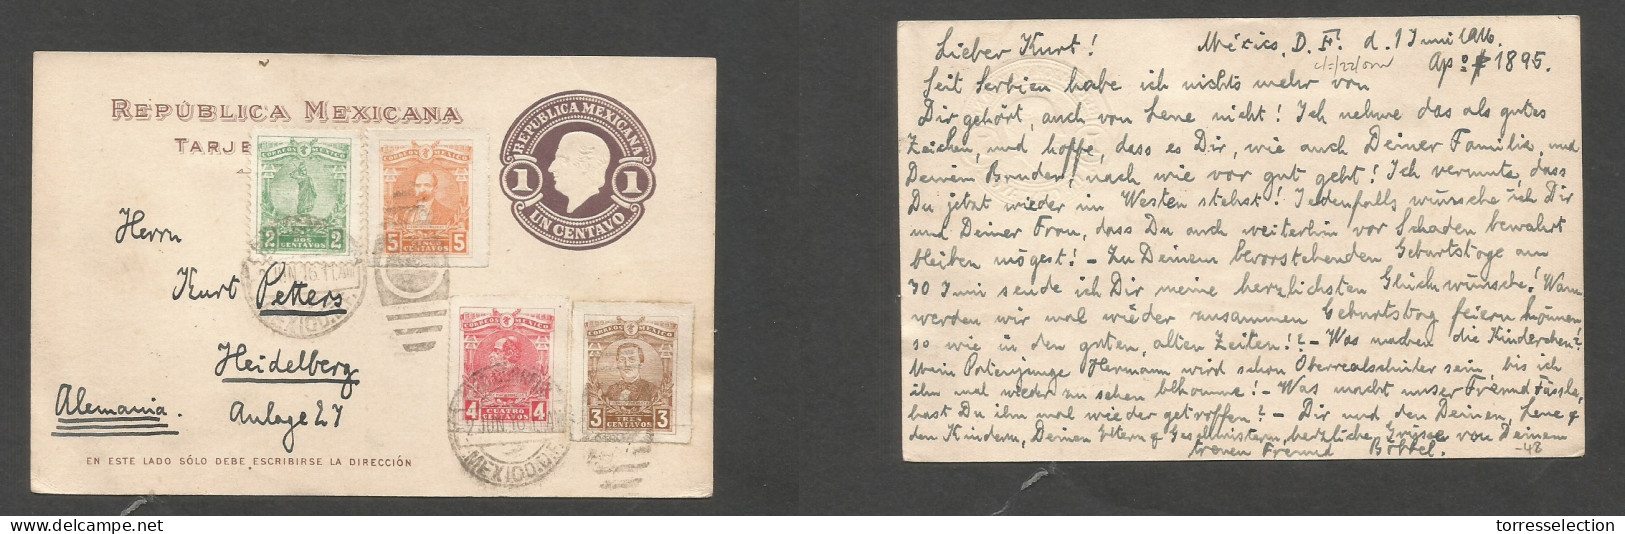 MEXICO - Stationery. 1916 (1-2 June) DF - Germany, Heidelberg 1c Lilac + 4 Diff Adtl, Stat Card, Cds Grill. Fine. Some S - México